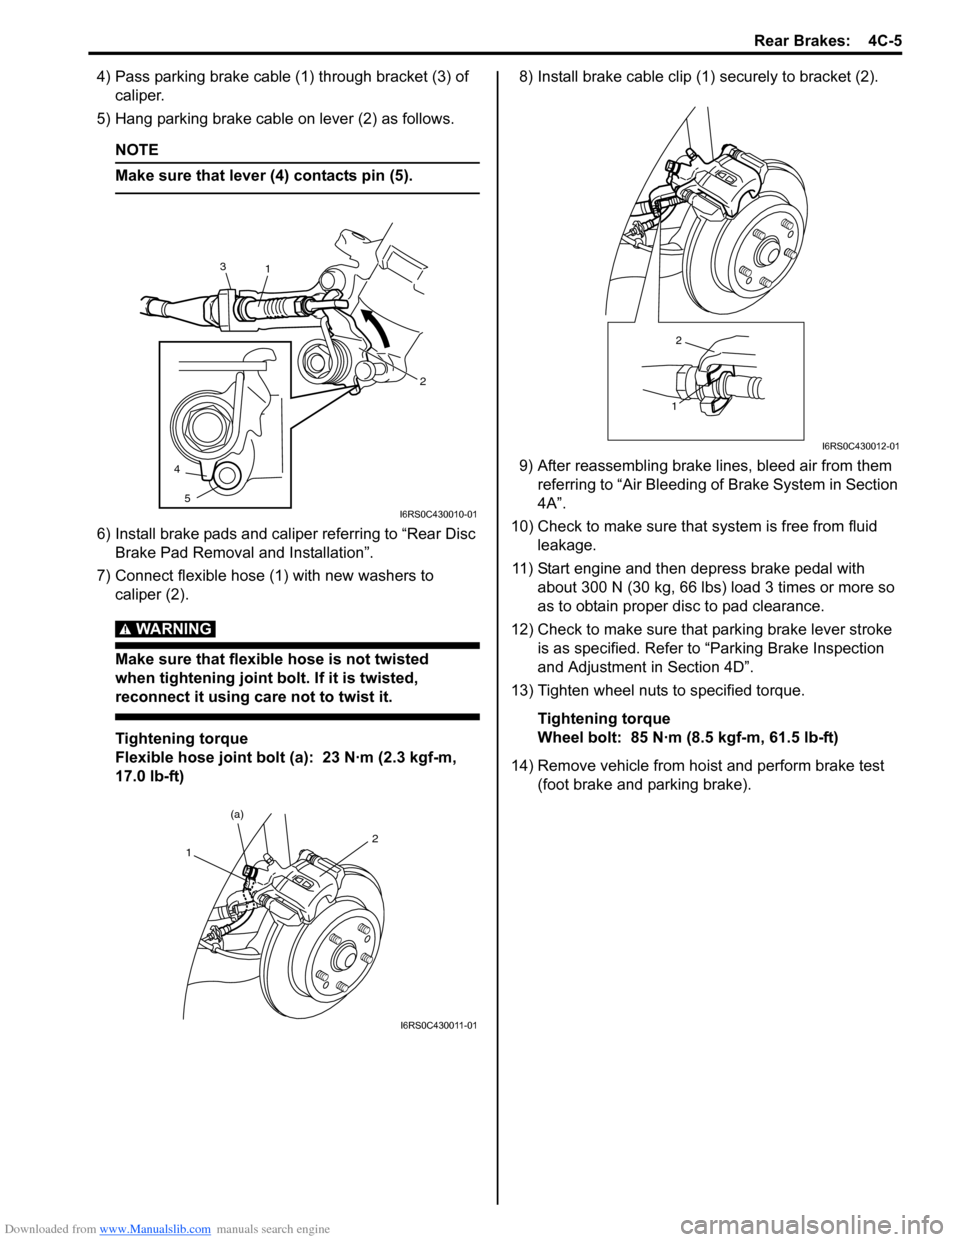 SUZUKI SWIFT 2006 2.G Service Workshop Manual Downloaded from www.Manualslib.com manuals search engine Rear Brakes:  4C-5
4) Pass parking brake cable (1) through bracket (3) of caliper.
5) Hang parking brake cable on lever (2) as follows.
NOTE
Ma